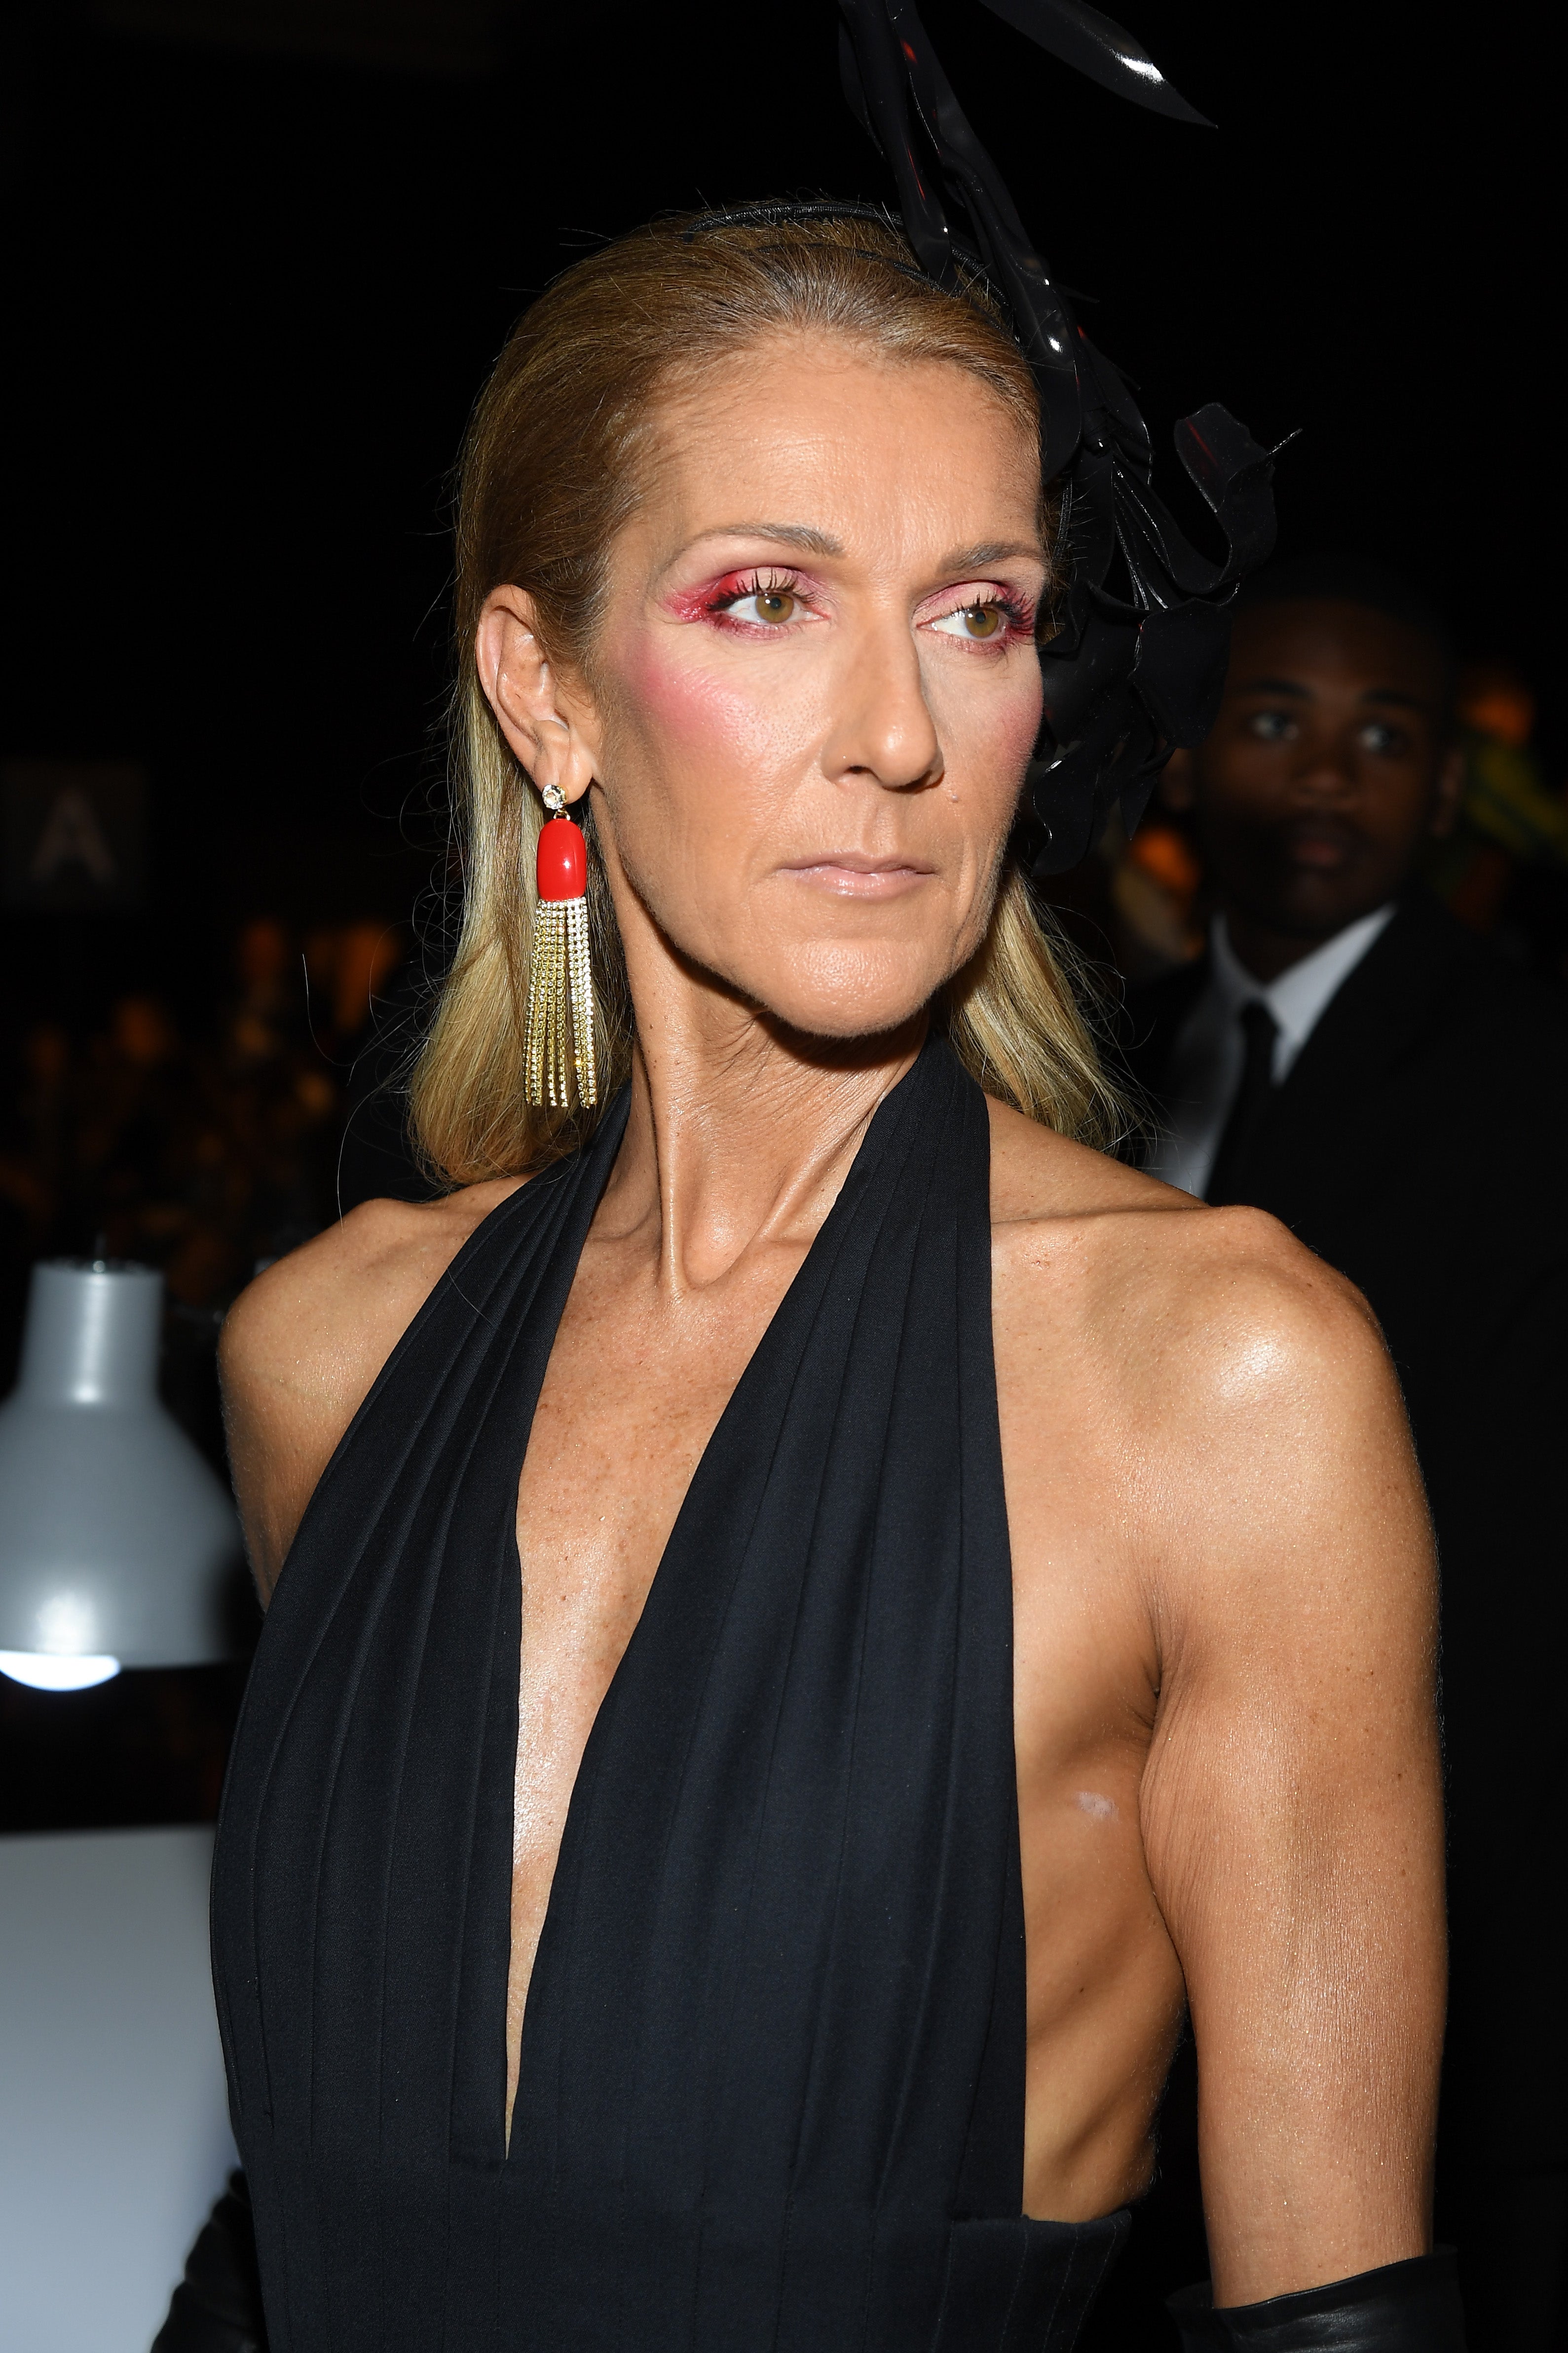 Celine Dion's sister worried about the singer: 